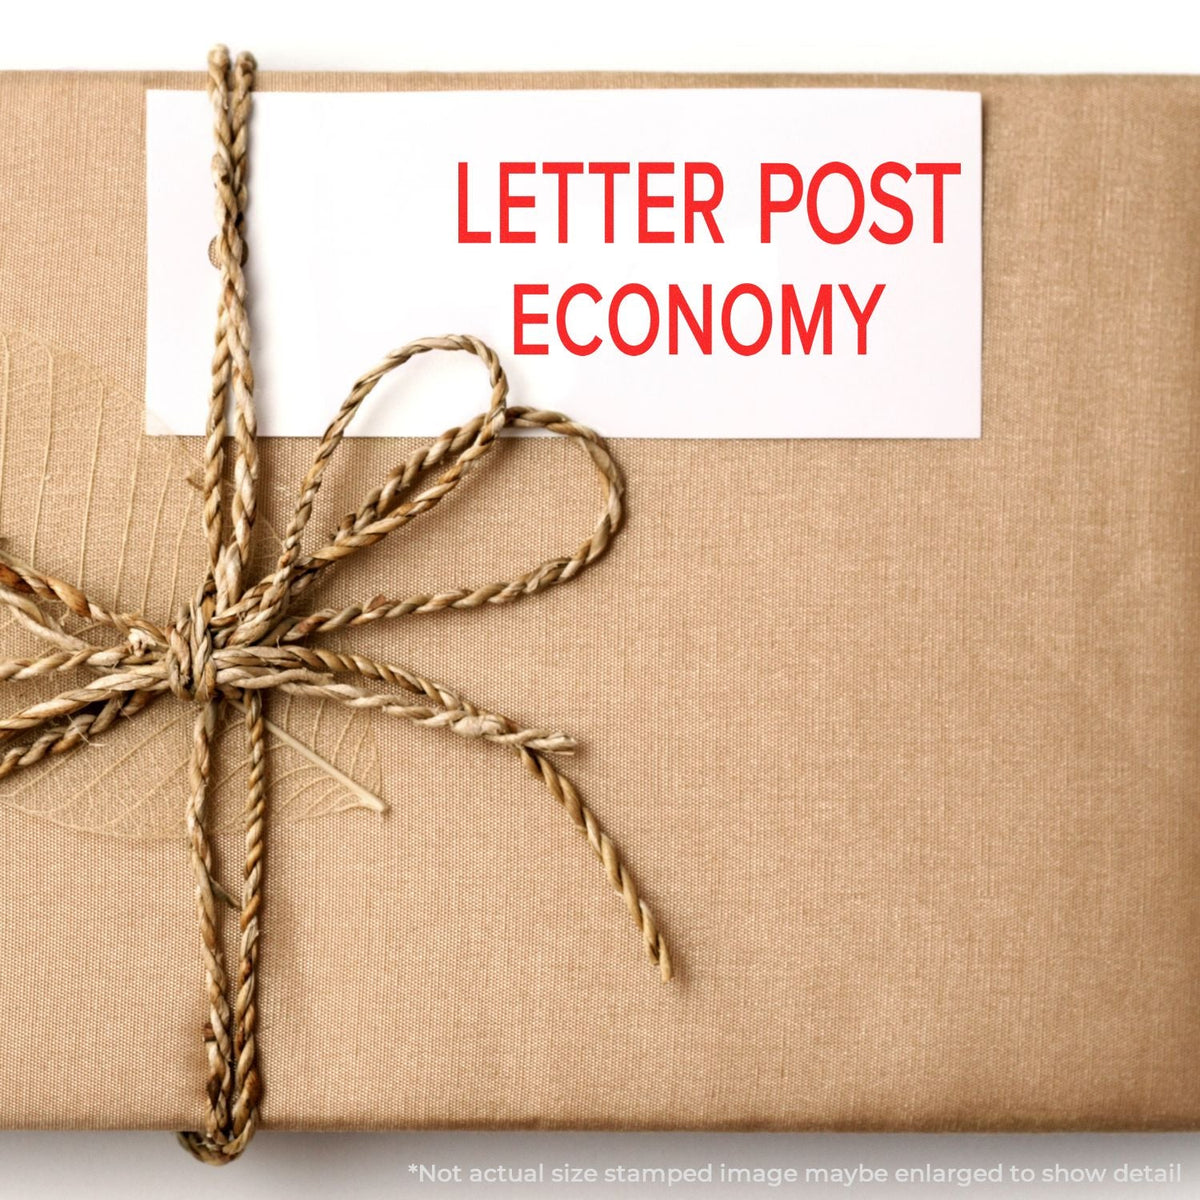 In Use Self-Inking Letter Post Economy Stamp Image